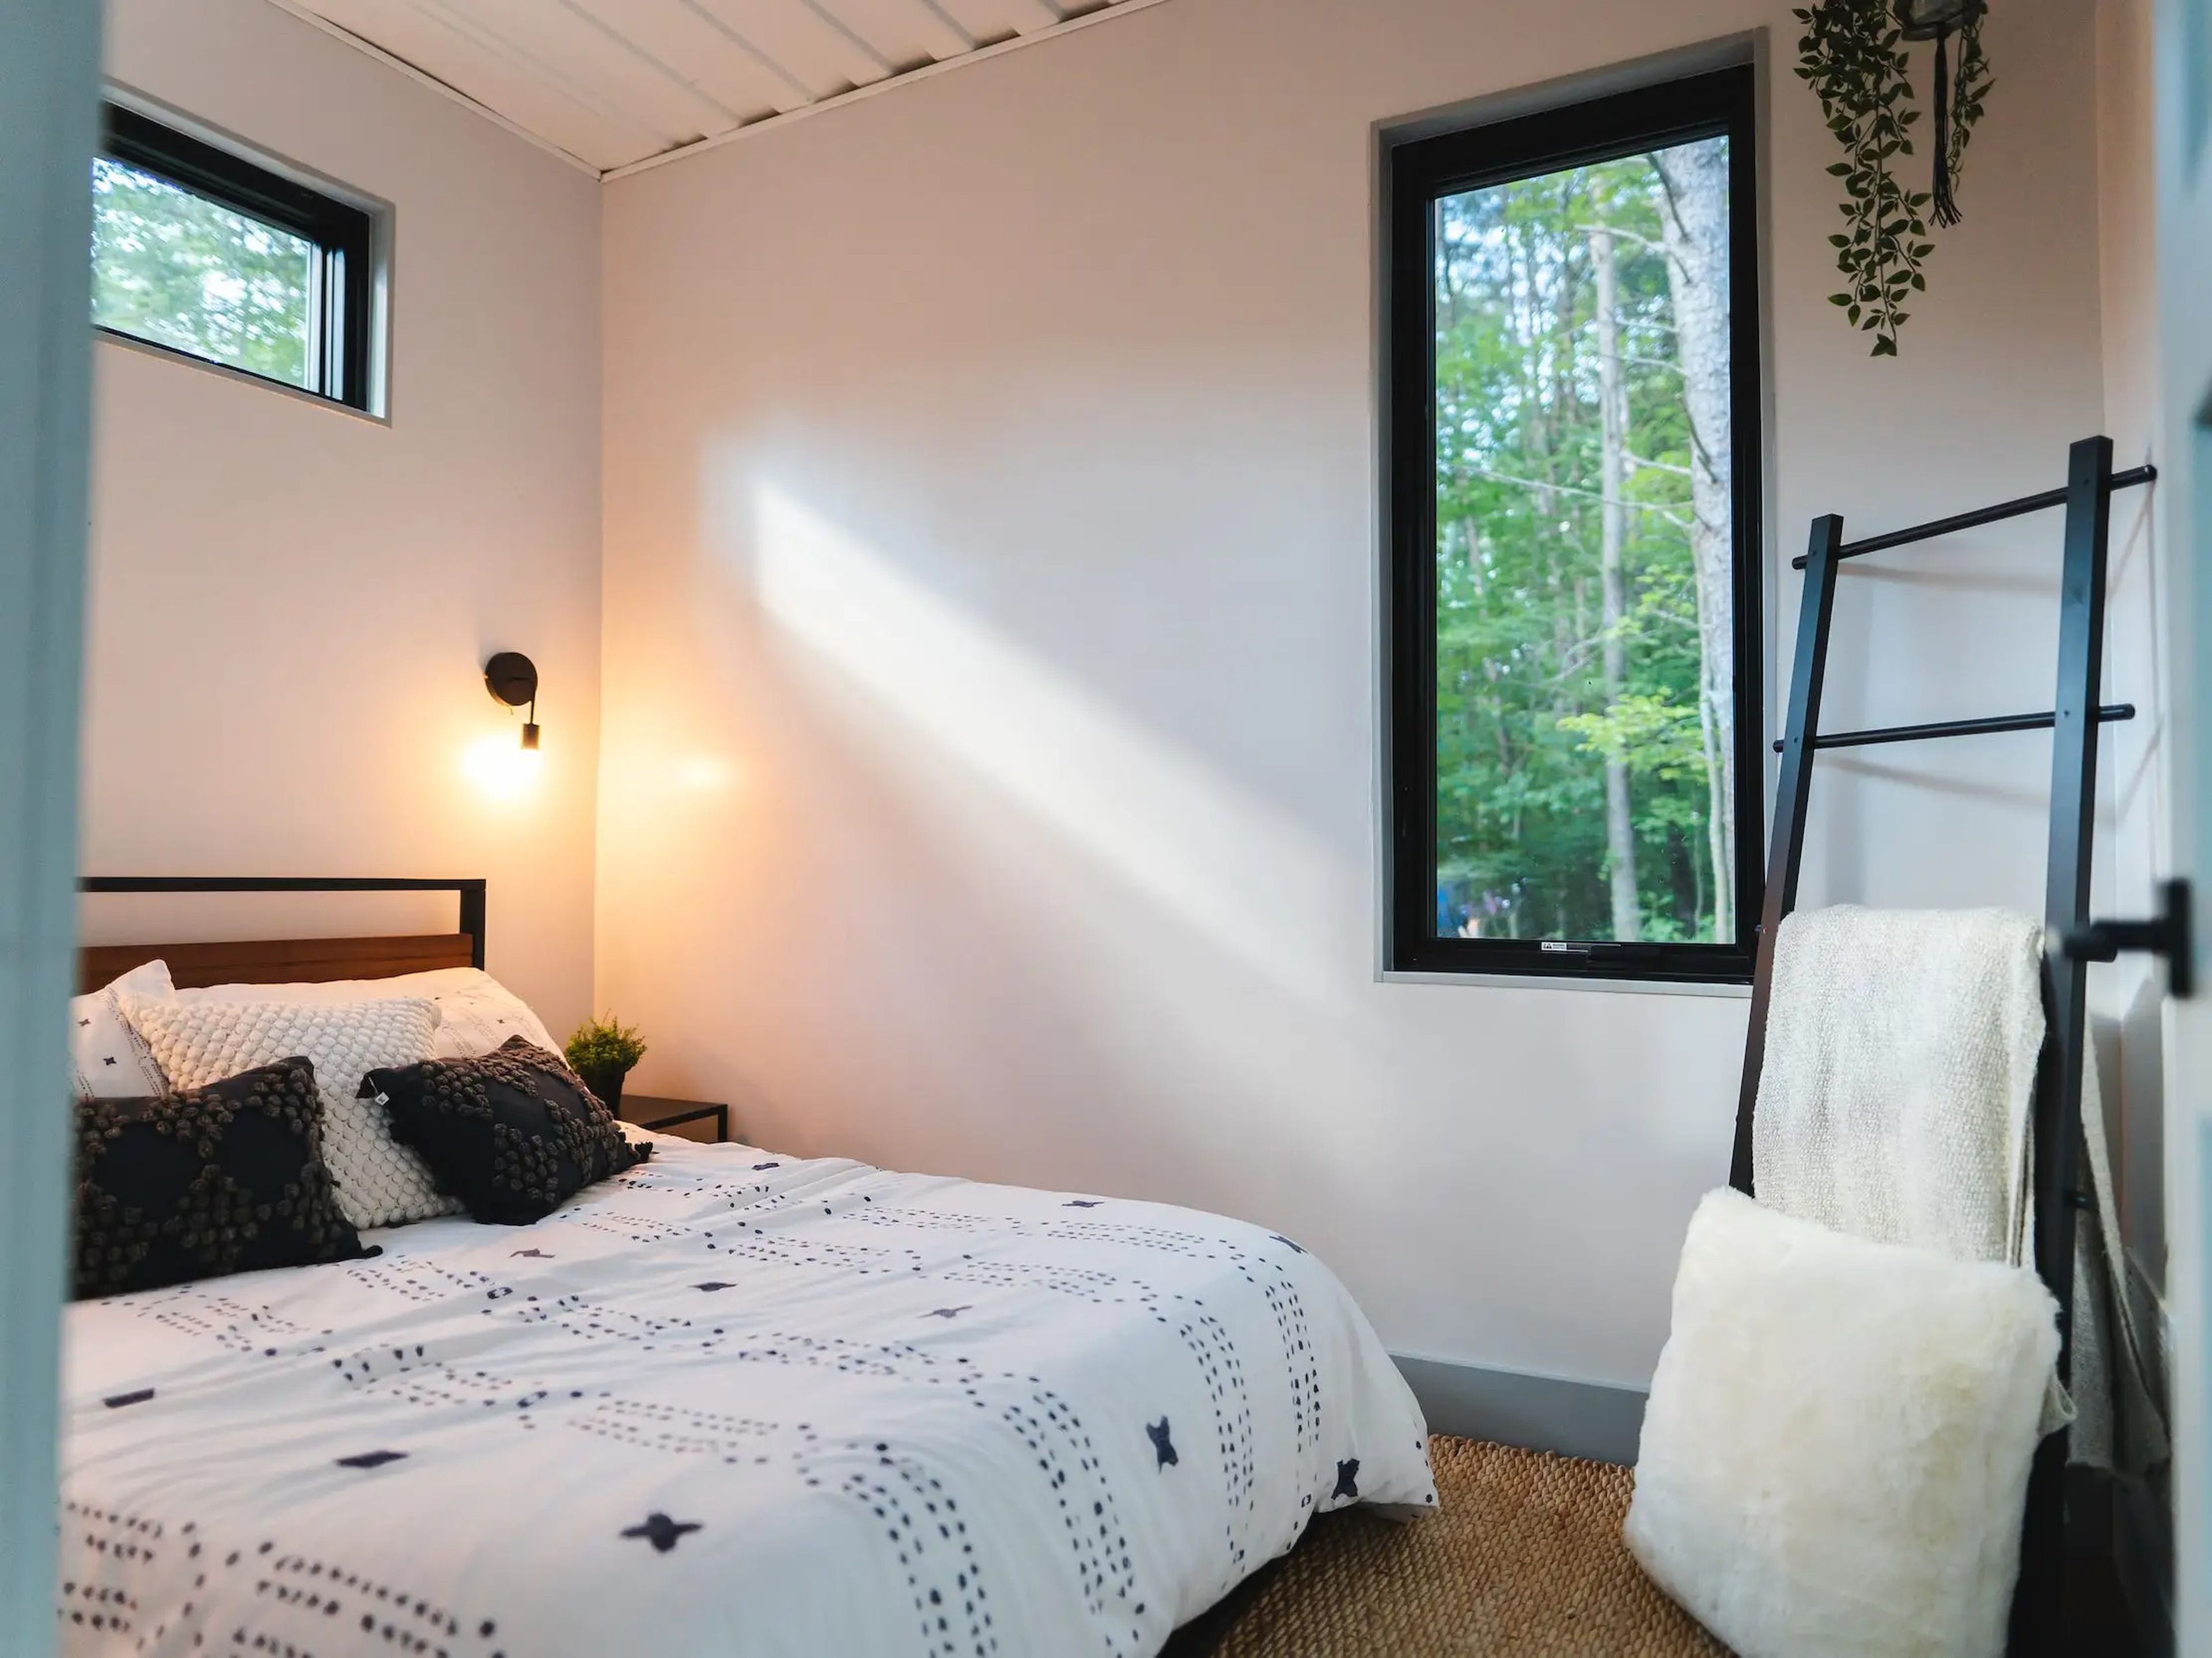 A bedroom with two windows and accents inside the OG Box, a shipping container home.